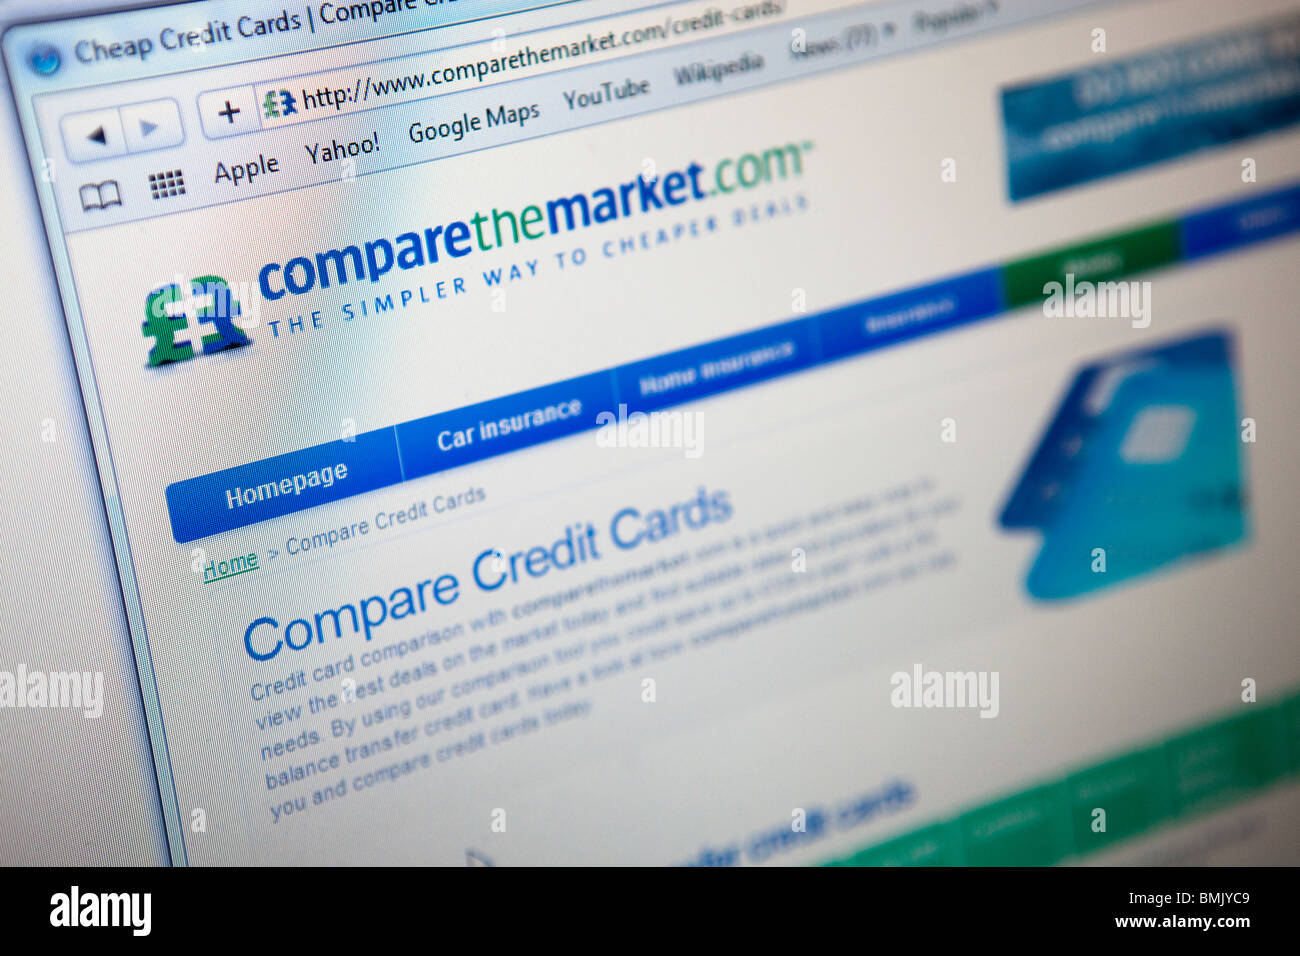 Close up of a computer monitor / screen showing the Compare the market .com website for comparing credit cards Stock Photo